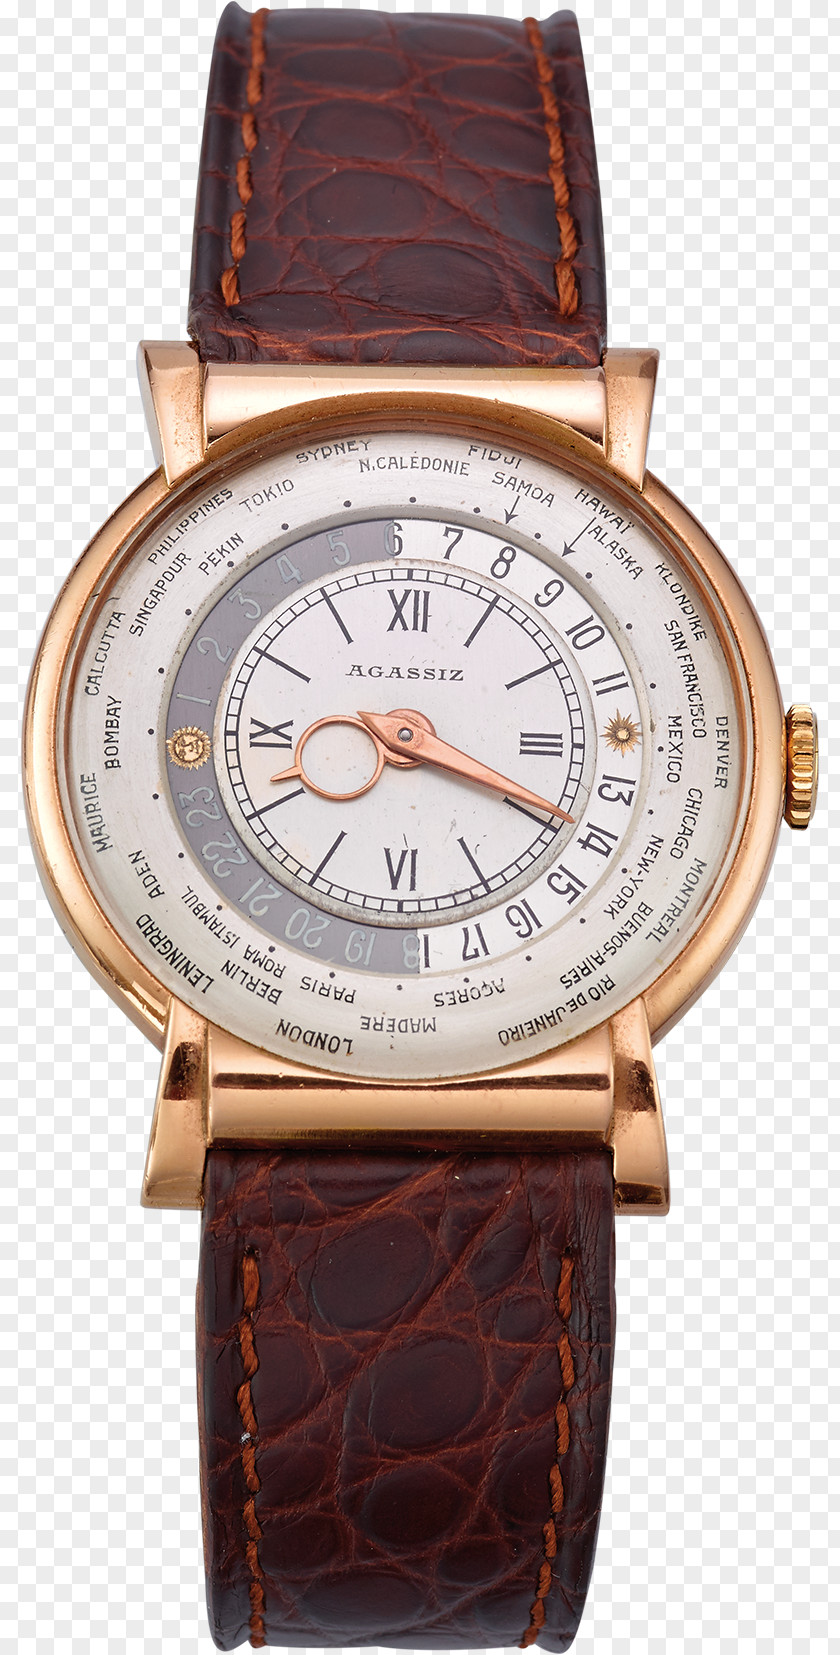 Watch Online Shopping Gant Clothing Accessories Otto GmbH PNG